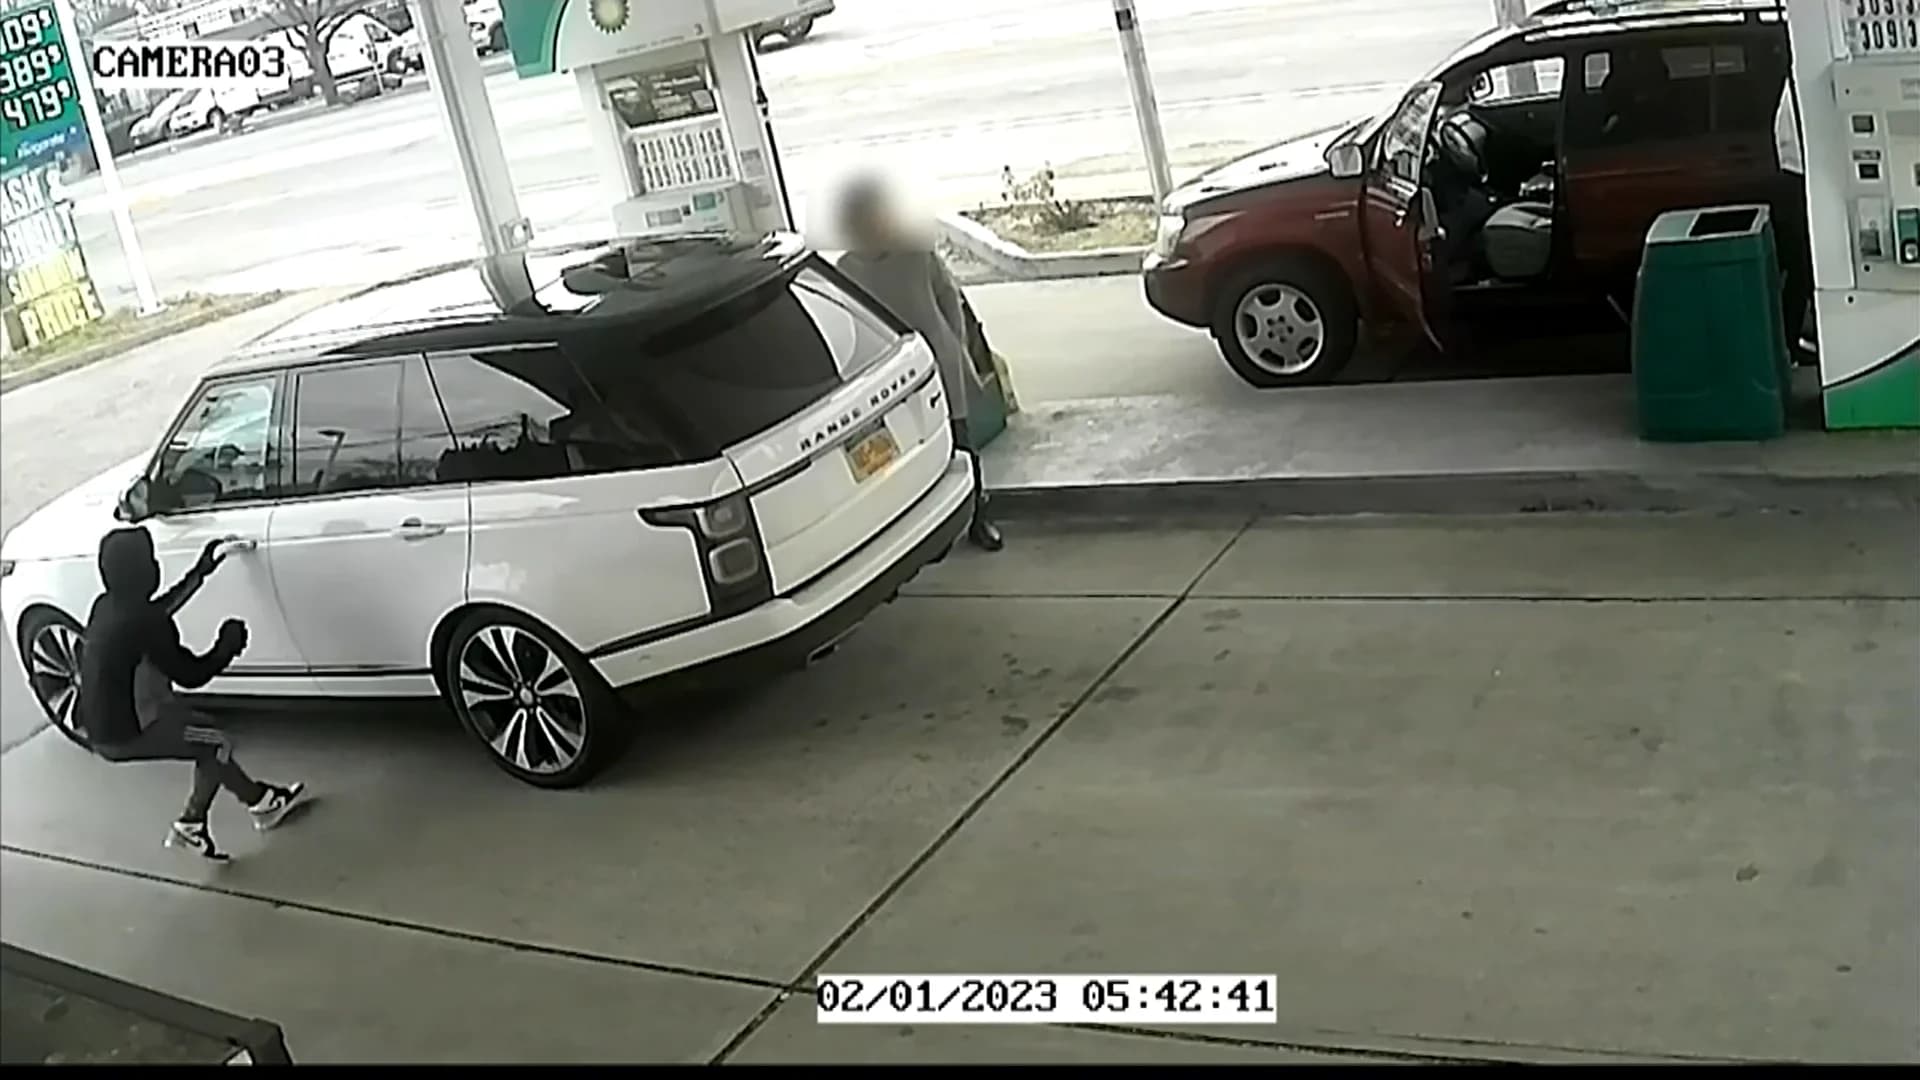 Guide: Safety tips to prevent car thefts while you pump gas